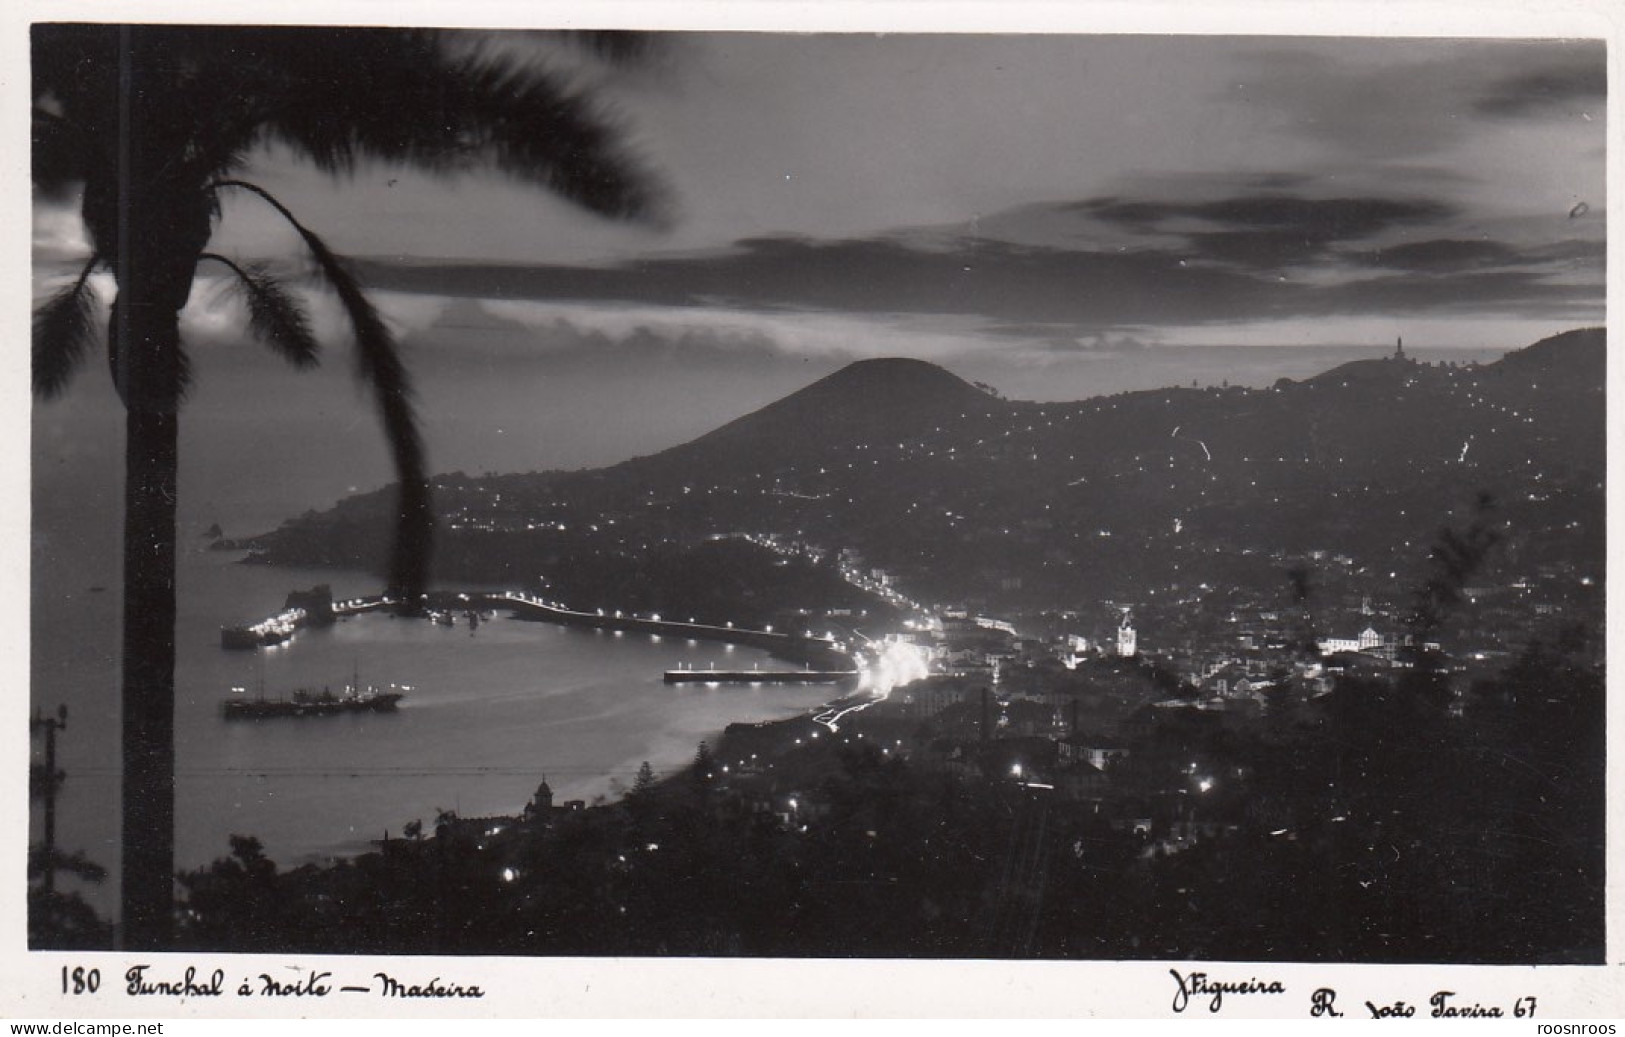 CARTE PHOTO MADEIRA MADERE - PORTUGAL - FUNCHAL LA NUIT - Madeira